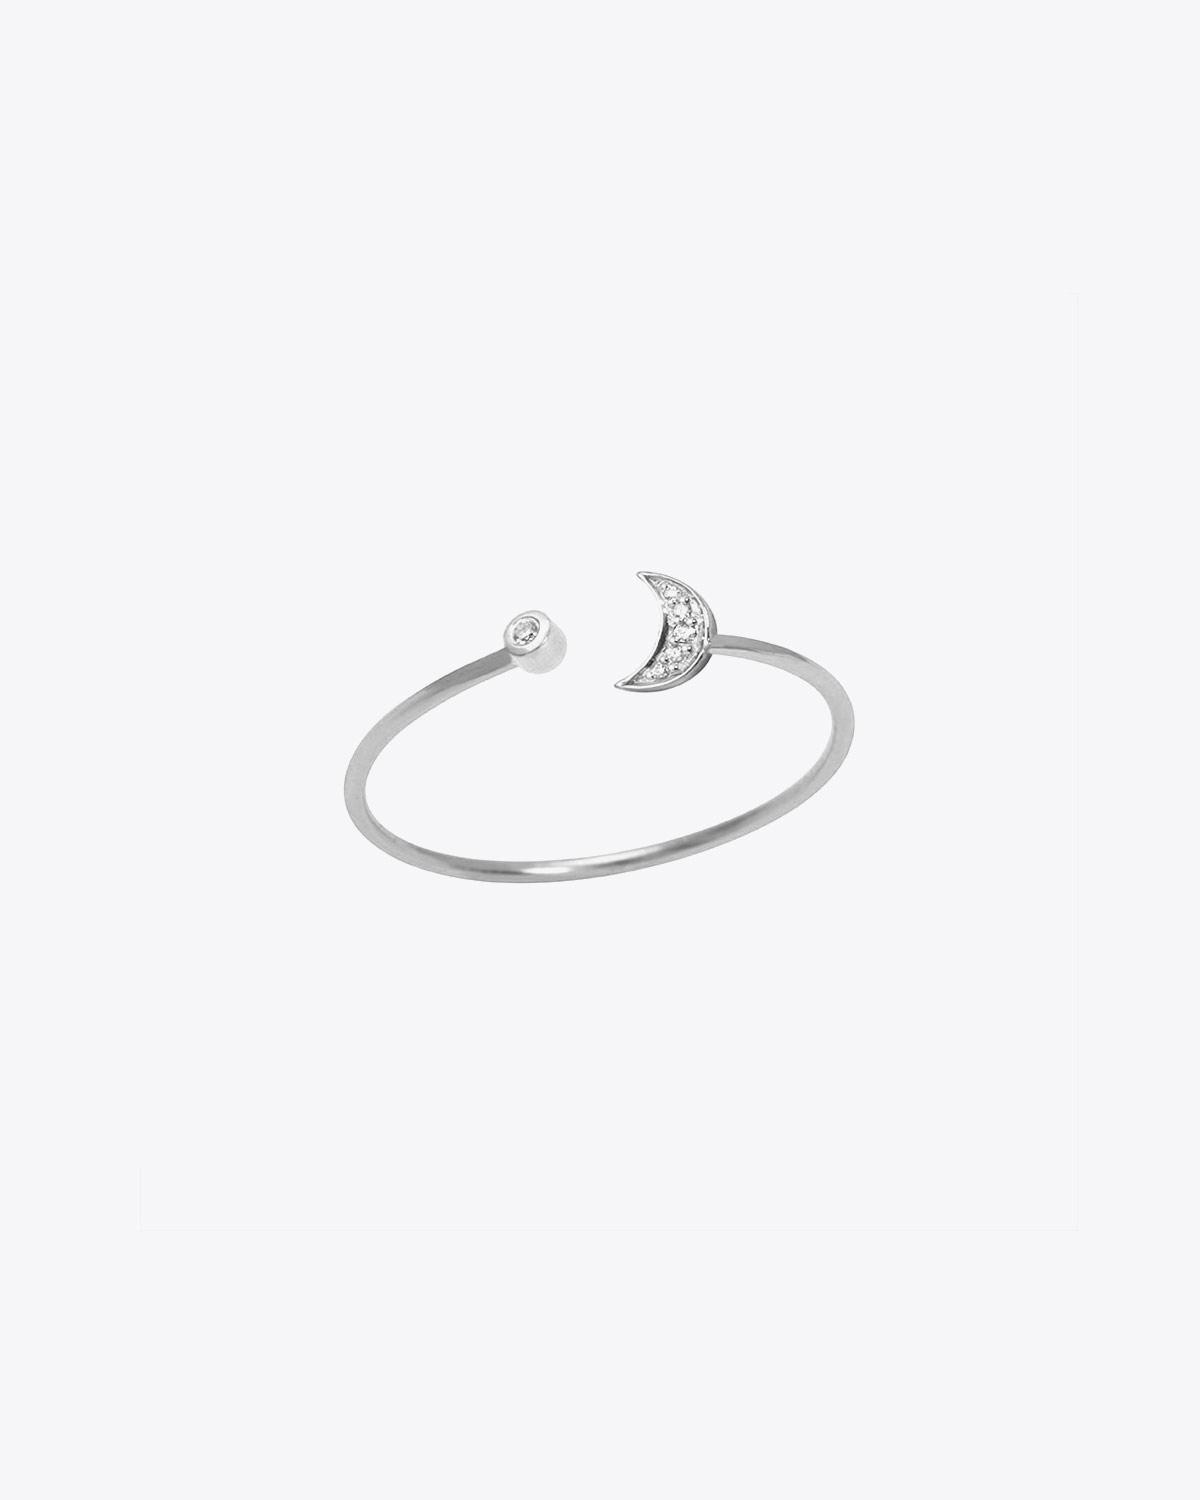 Feidt Bague Lune ouverte In the Moon for love - Or blanc 18k